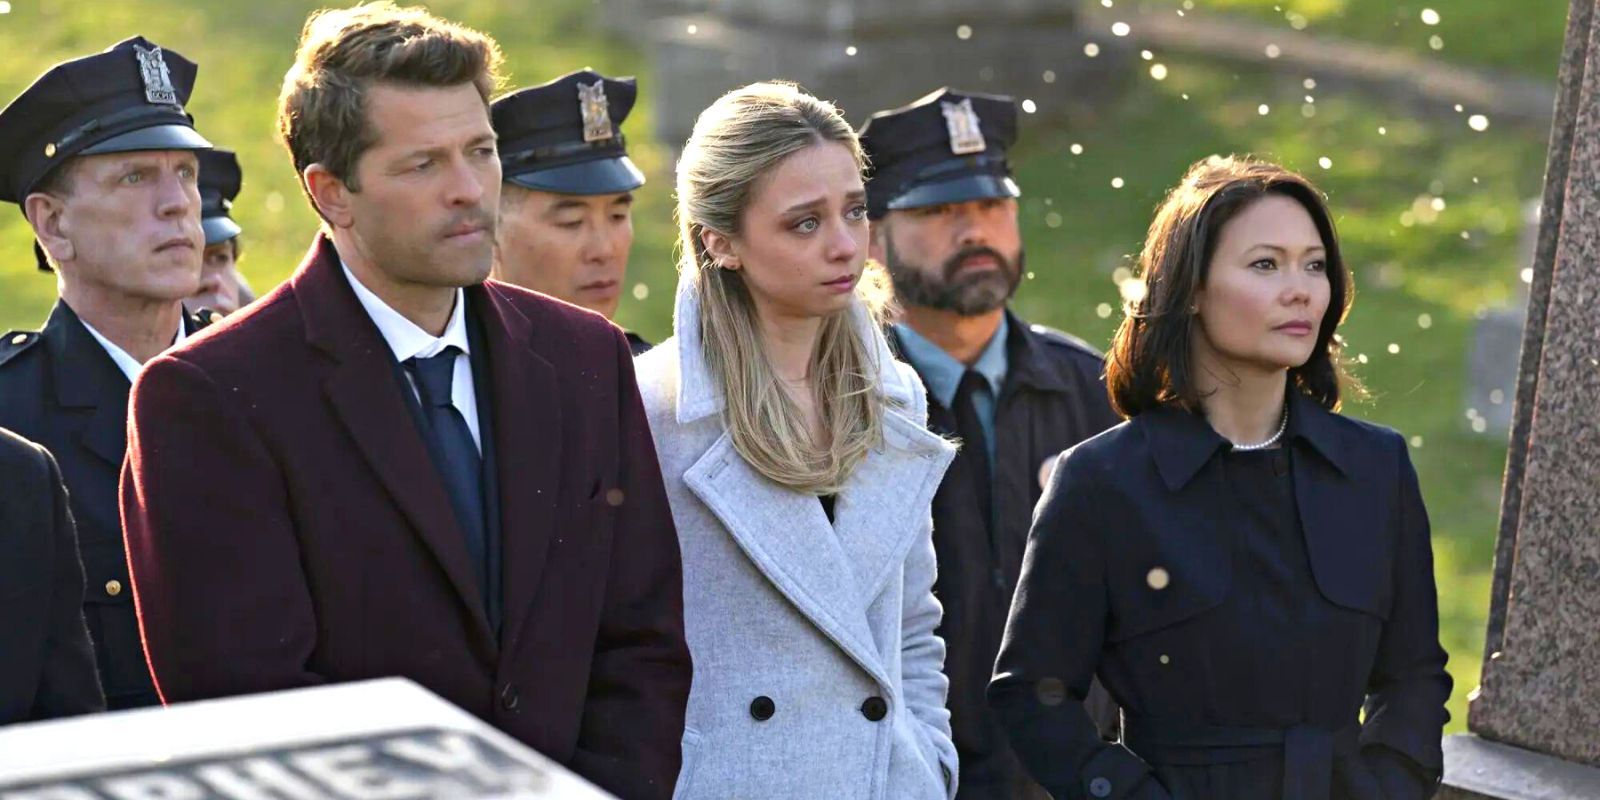 Misha Collins' Harvey Dent alongside Anna Lore's Stephanie Brown at a funeral, backed by police officers